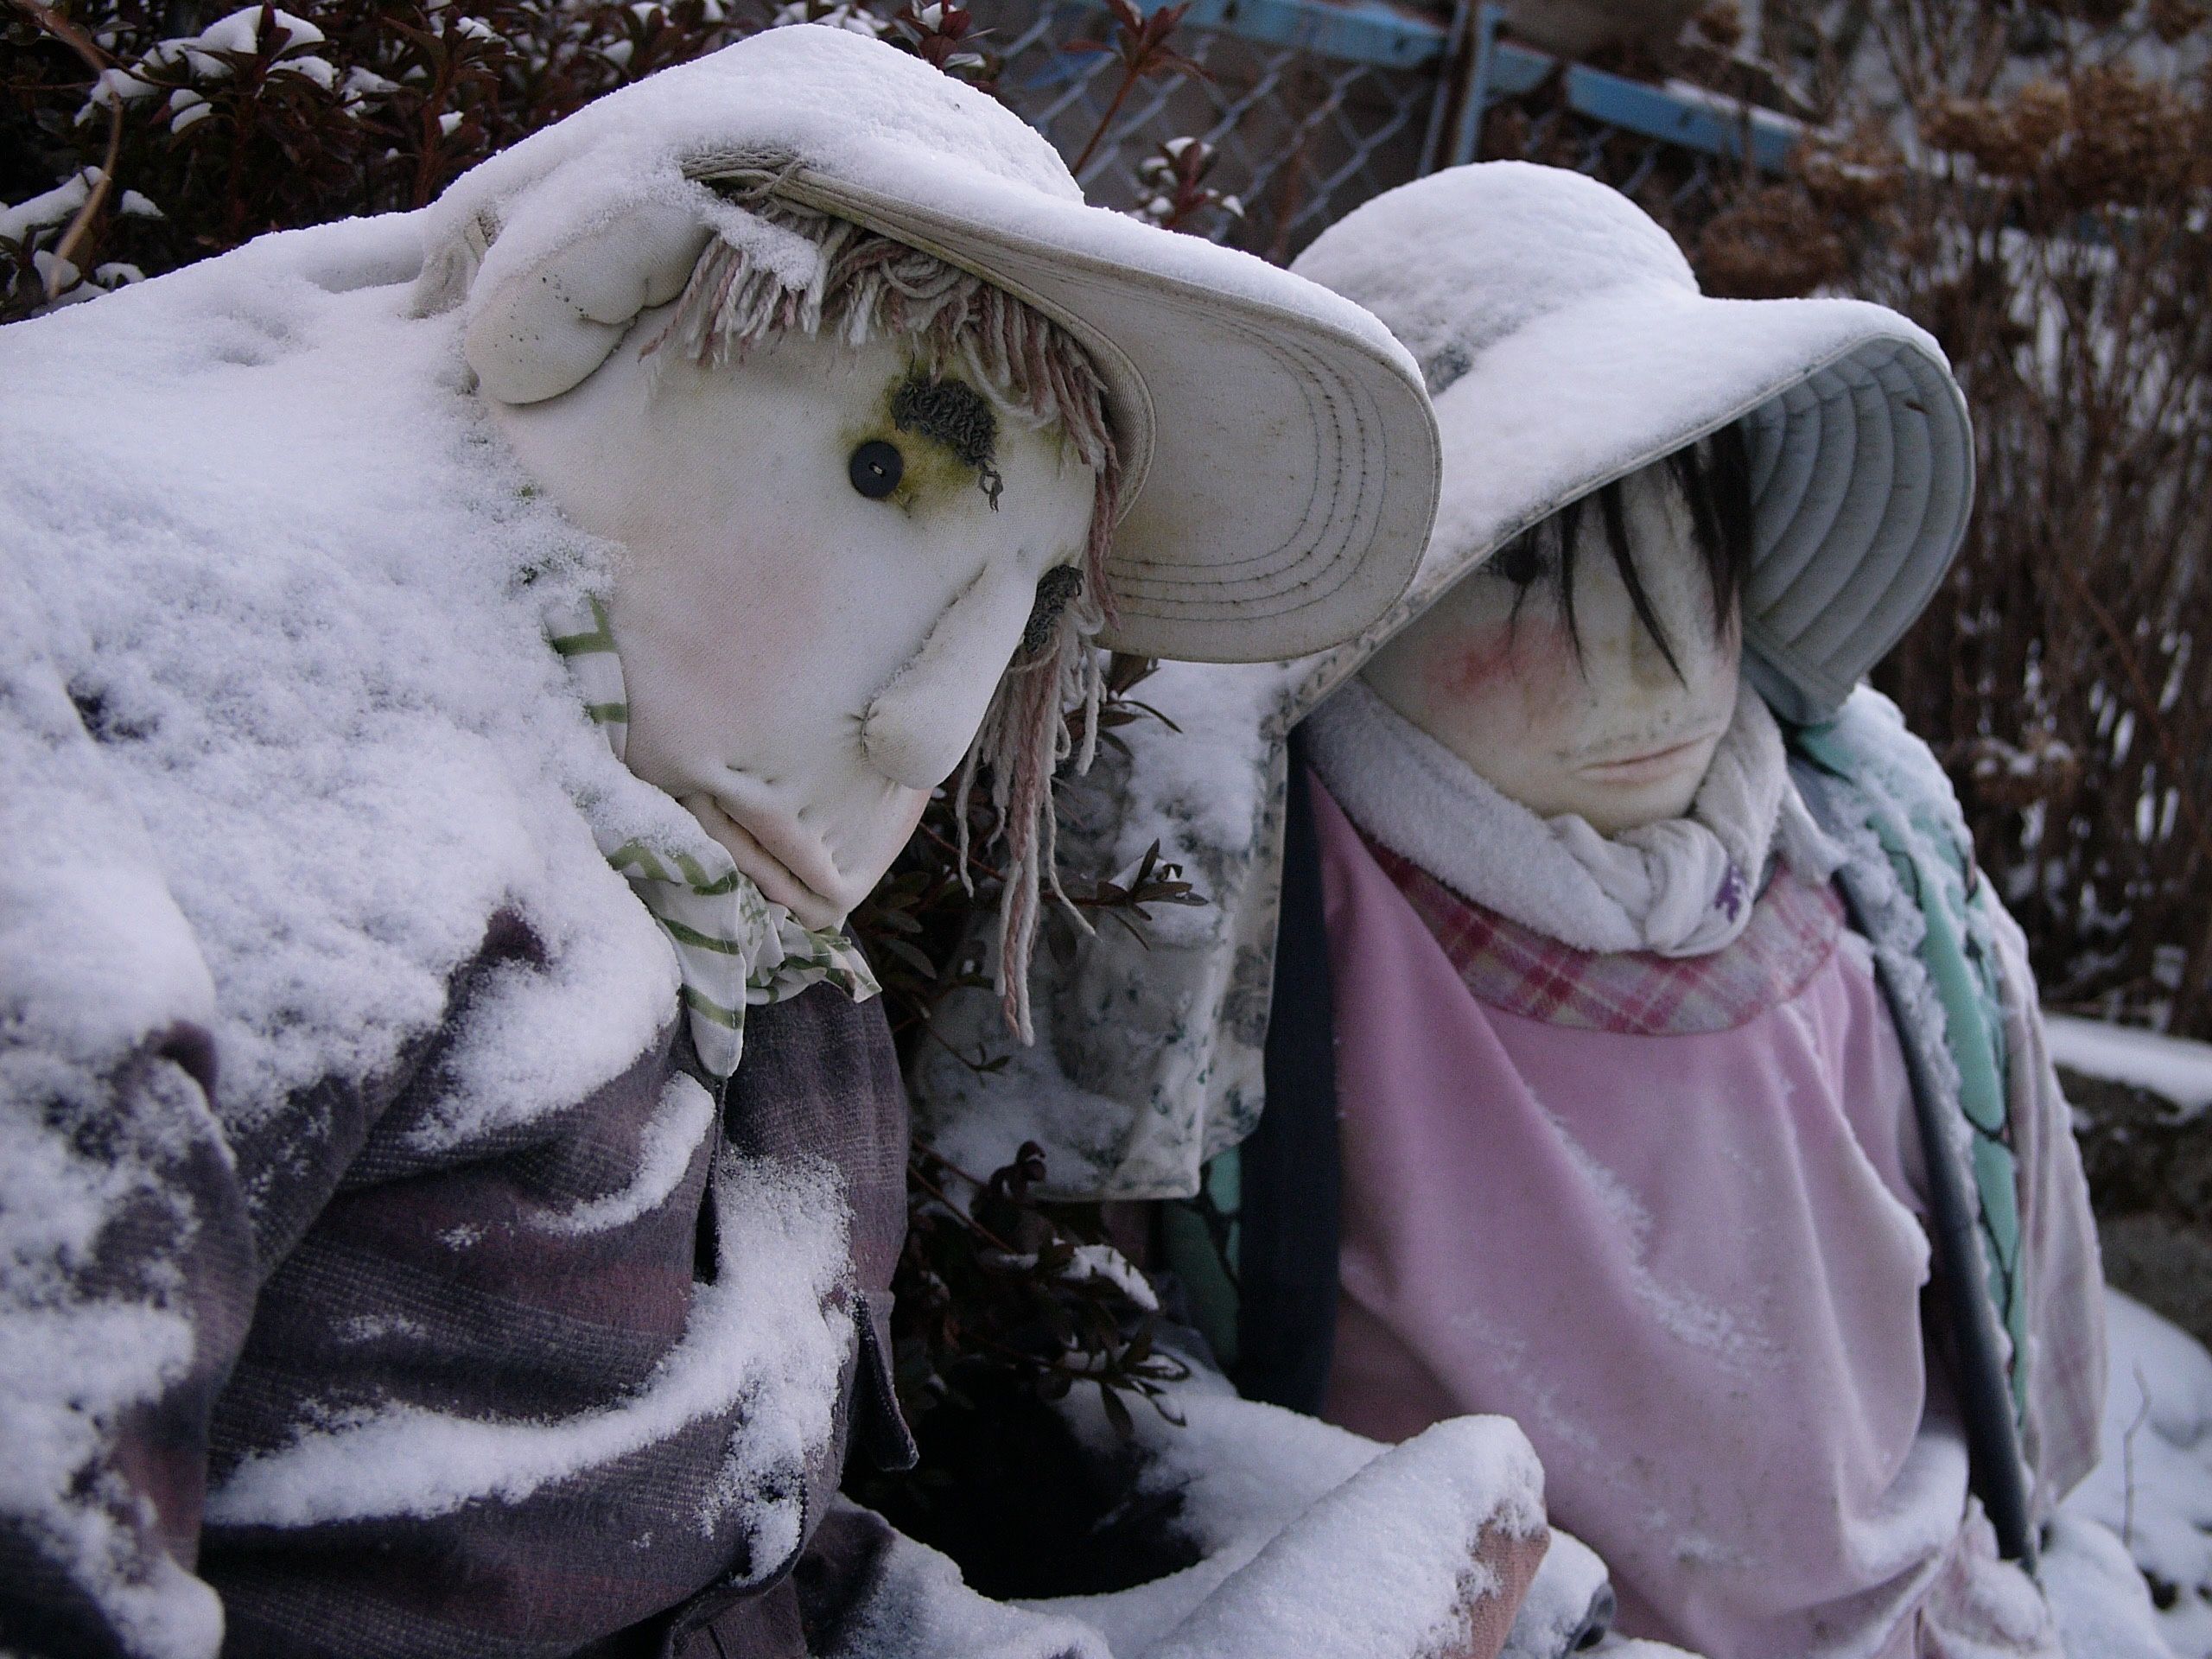 Dolls representing an older man and a woman, similarly covered in snow.